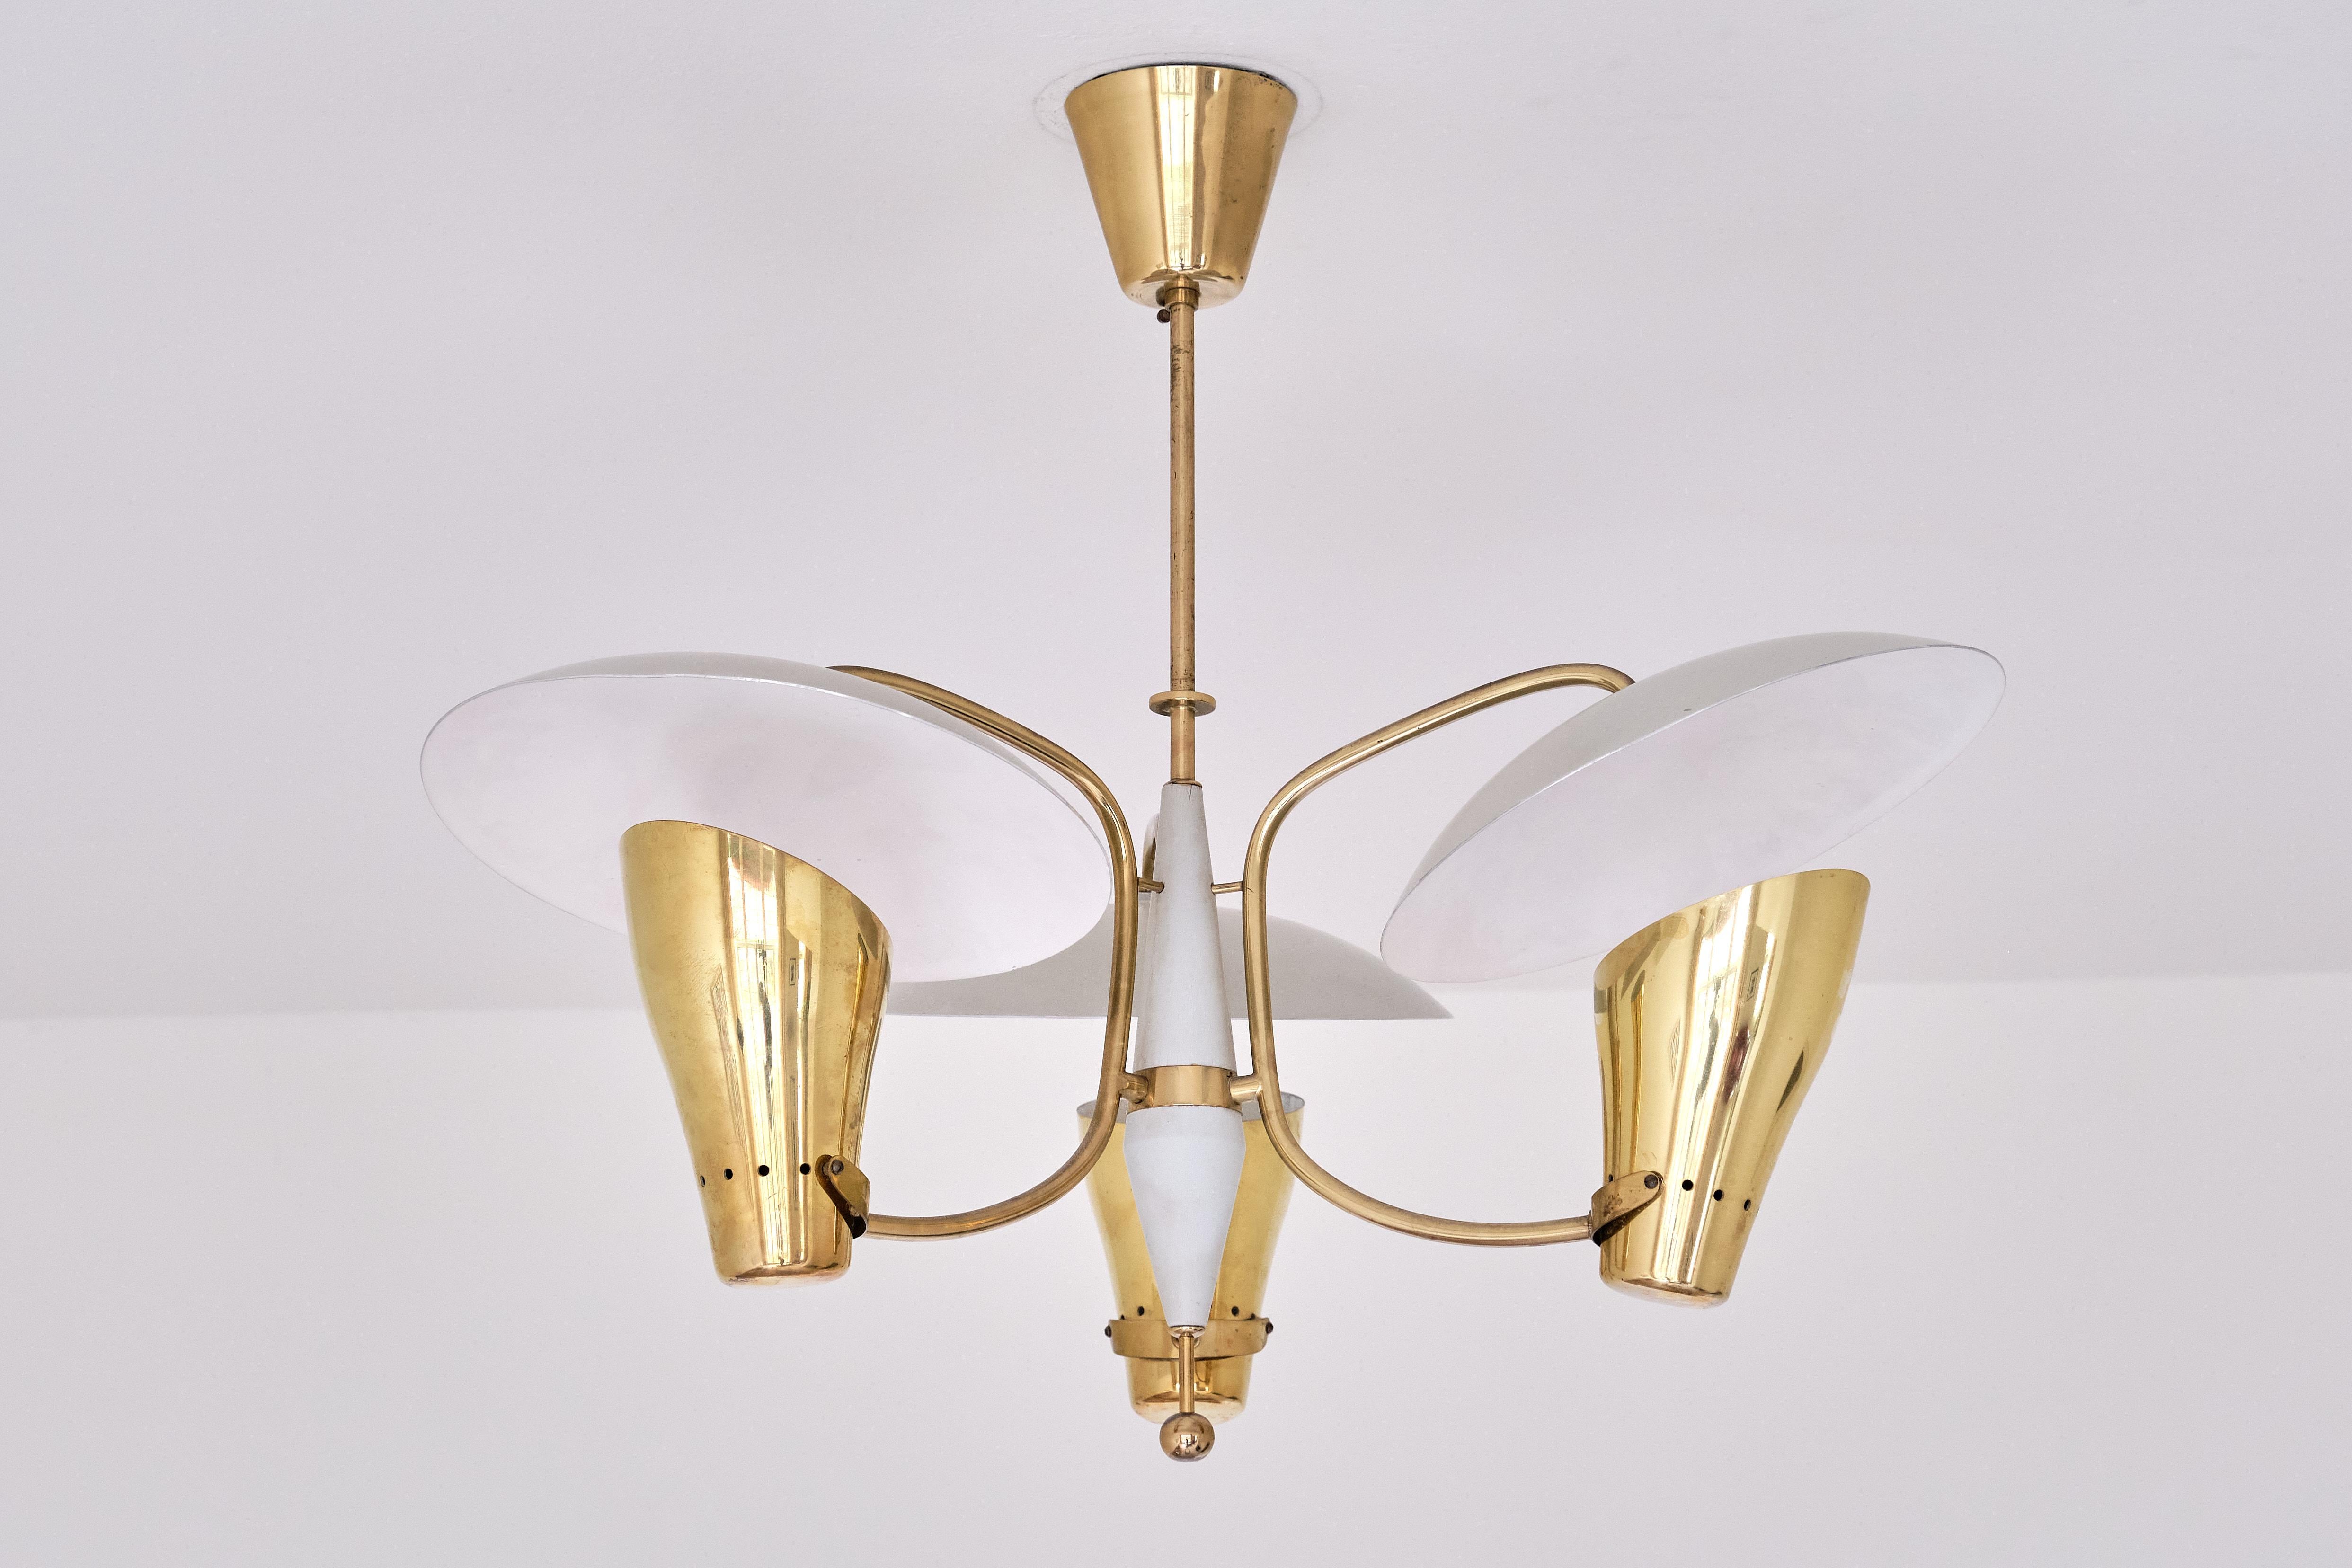 This exceptionally rare chandelier/ceiling light was produced by Boréns in Borås, Sweden in the early 1950s. The elegant design consists of three brass shades with a perforated detail across the lower part of the sconces. Placed above the brass